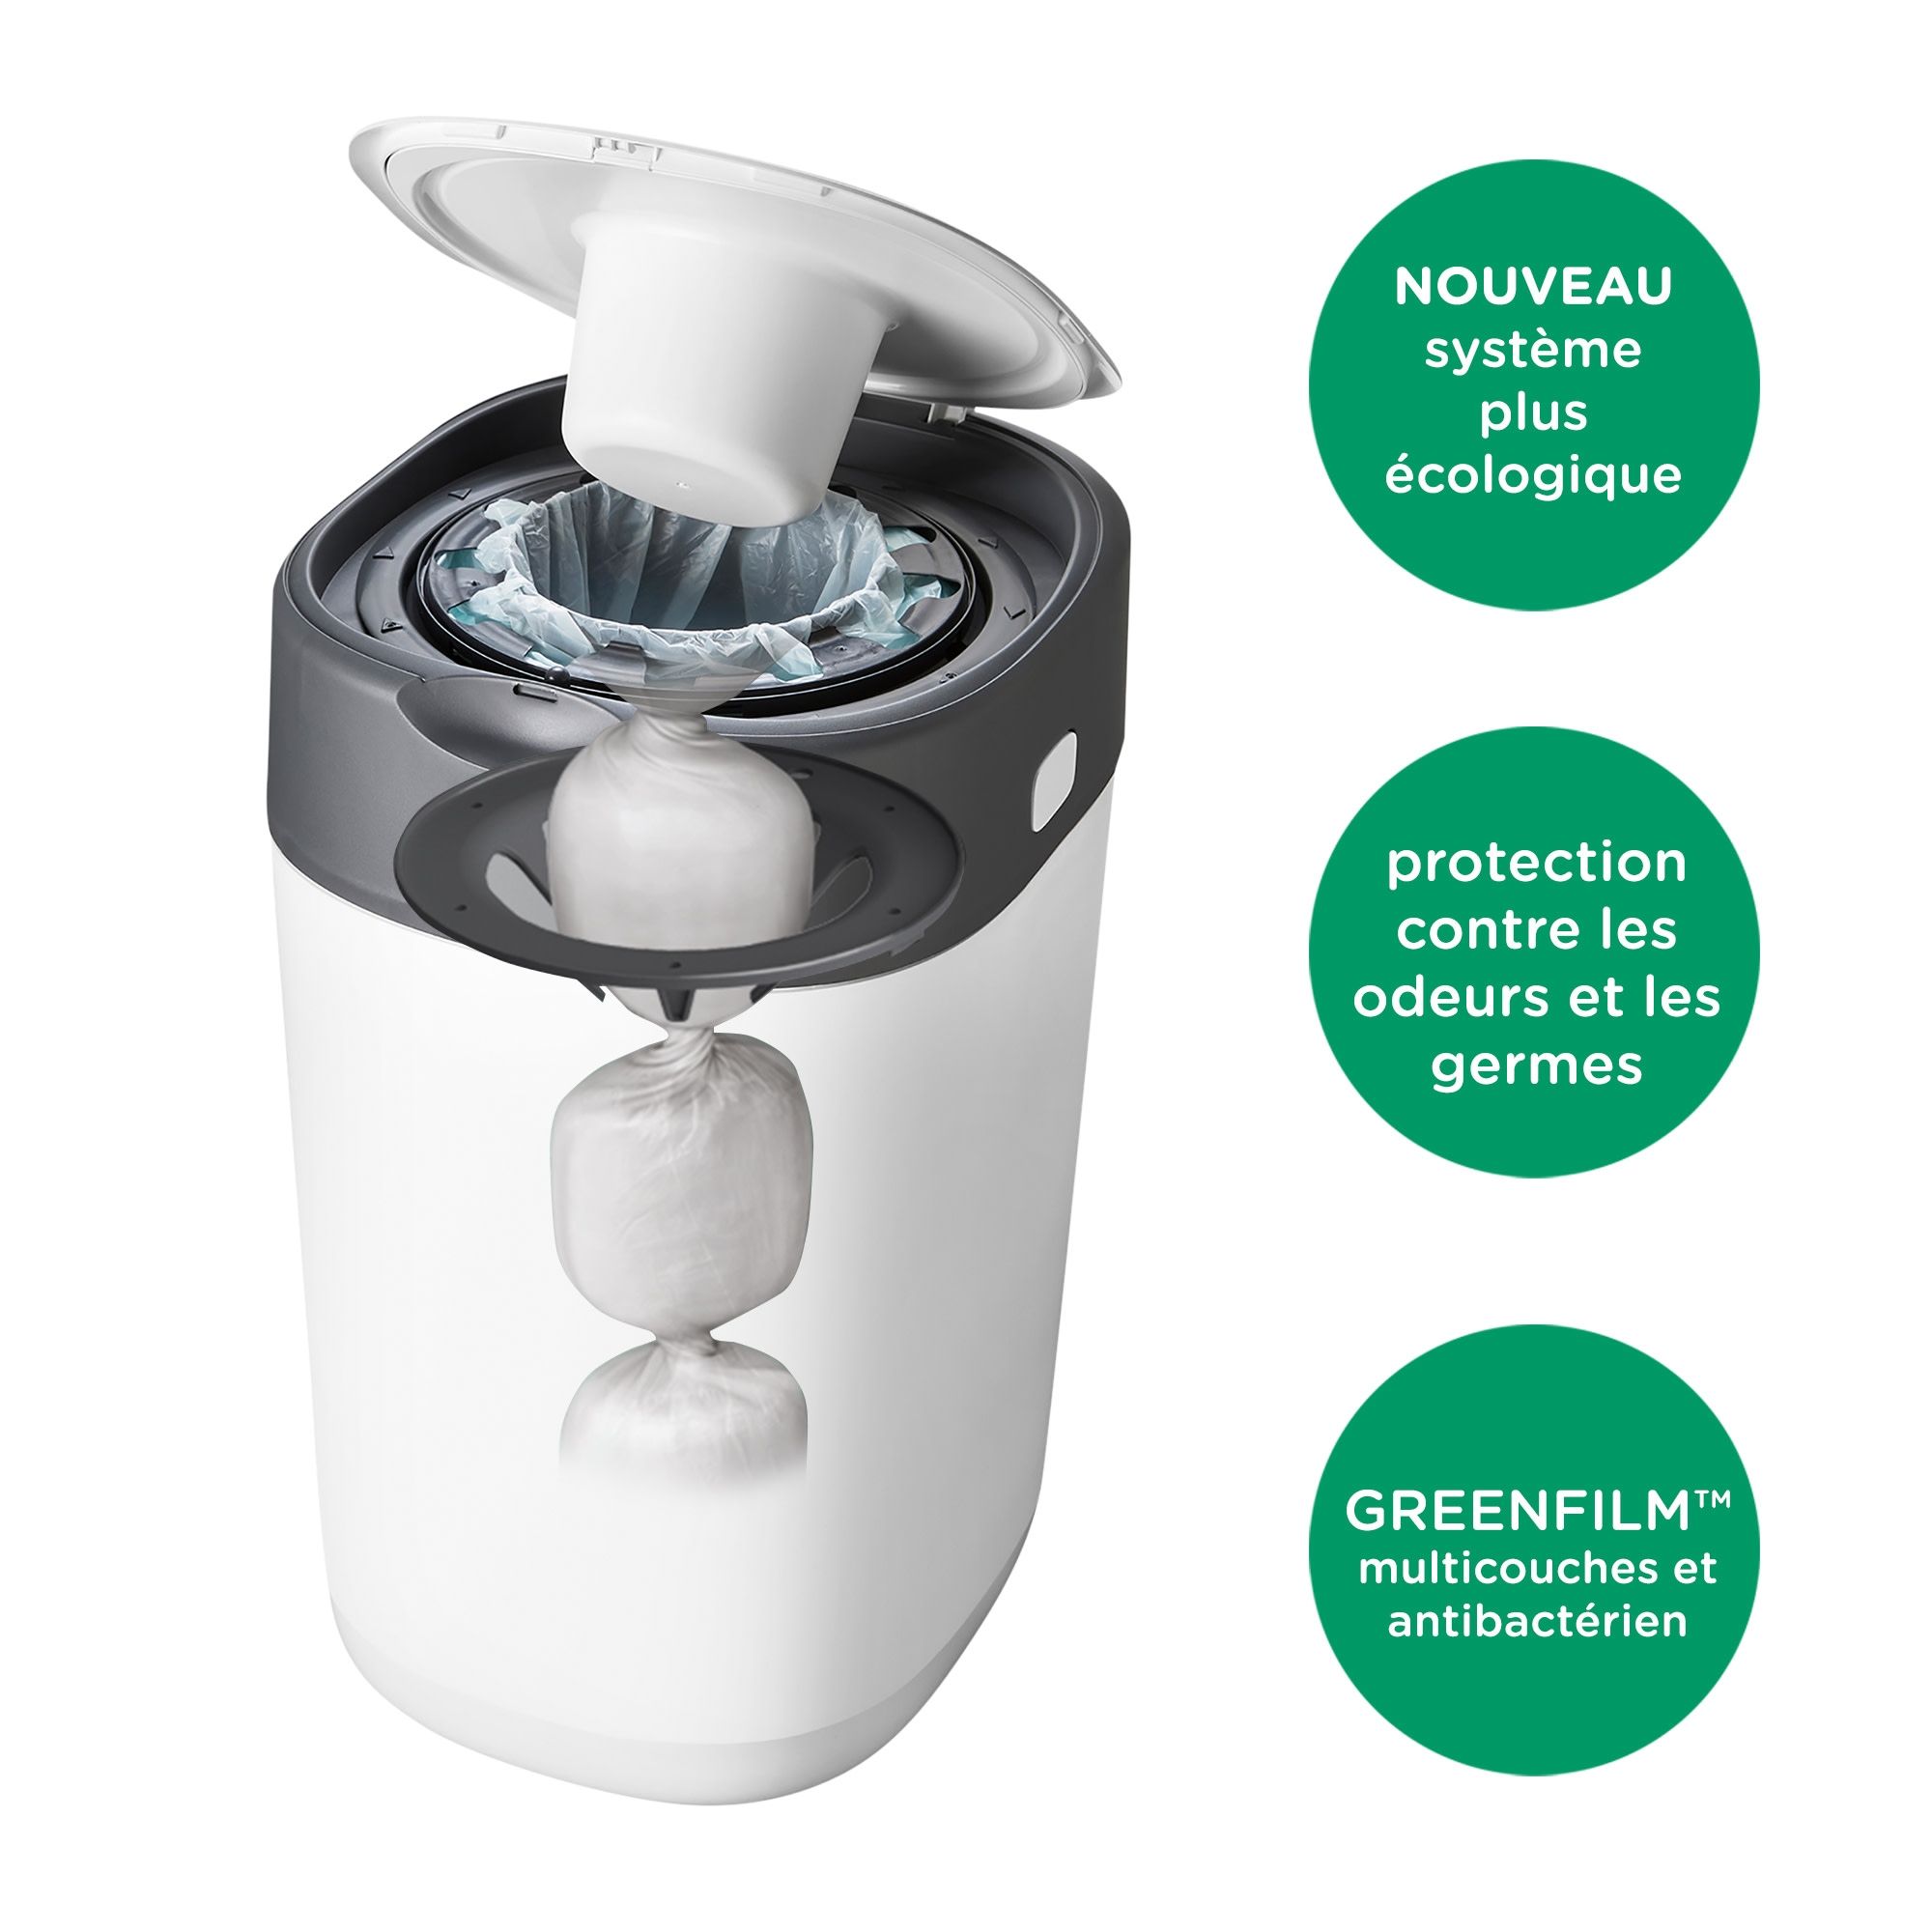 Poubelle à couches Tommee Tippee starter pack twist & click blanc bac +  6 recharges ffp